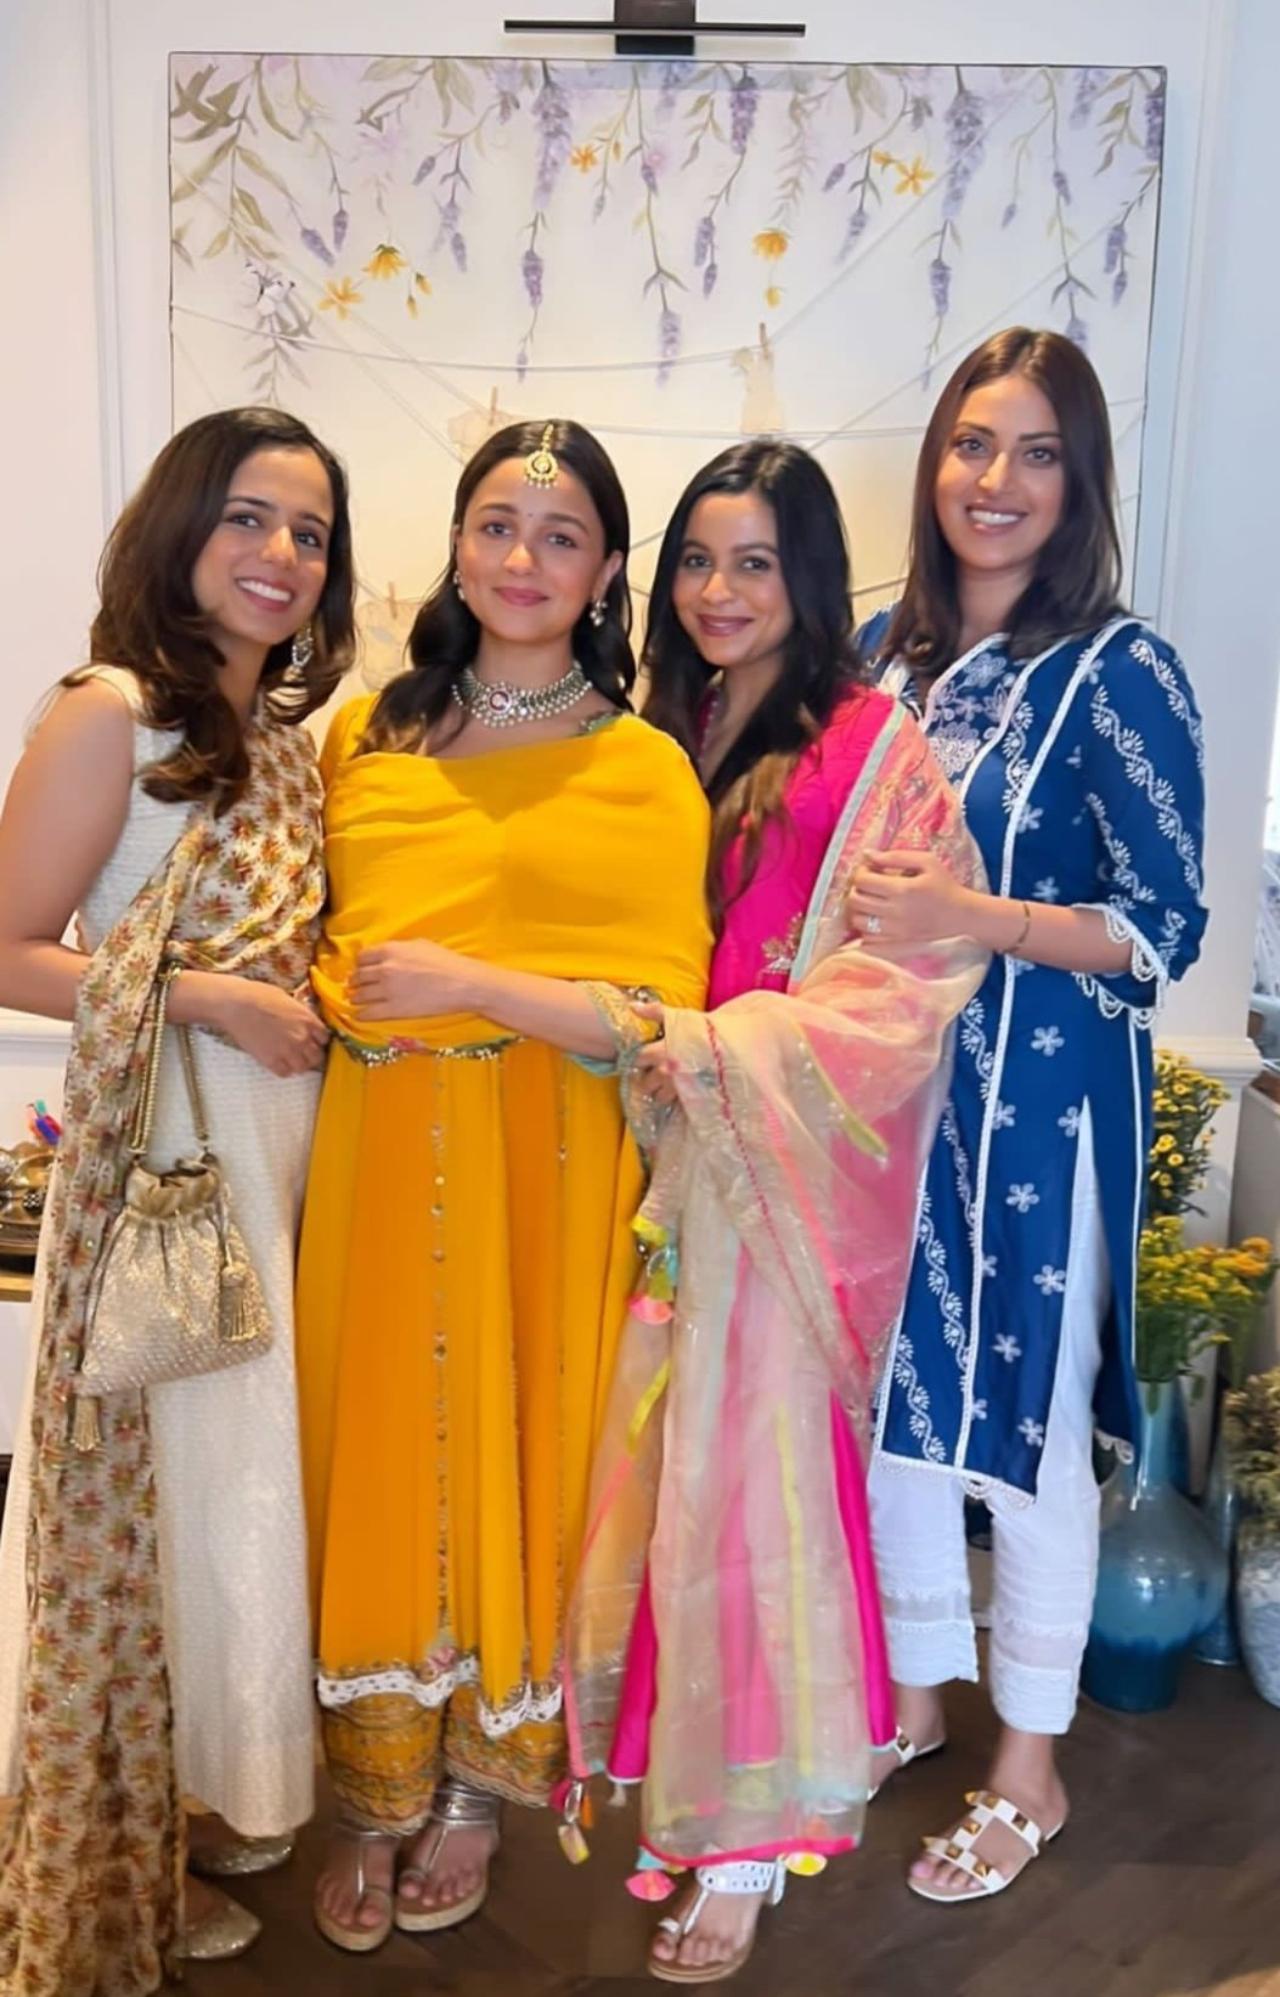 Taking to Instagram, actor Anushka Ranjan shared a glimpse from the baby shower in which Alia could be seen flaunting her cute smile in a yellow suit, standing beside her friends Anushka, Rishika Moghe and her sister Shaheen Bhatt. Soon after the picture was out, it got viral on social media